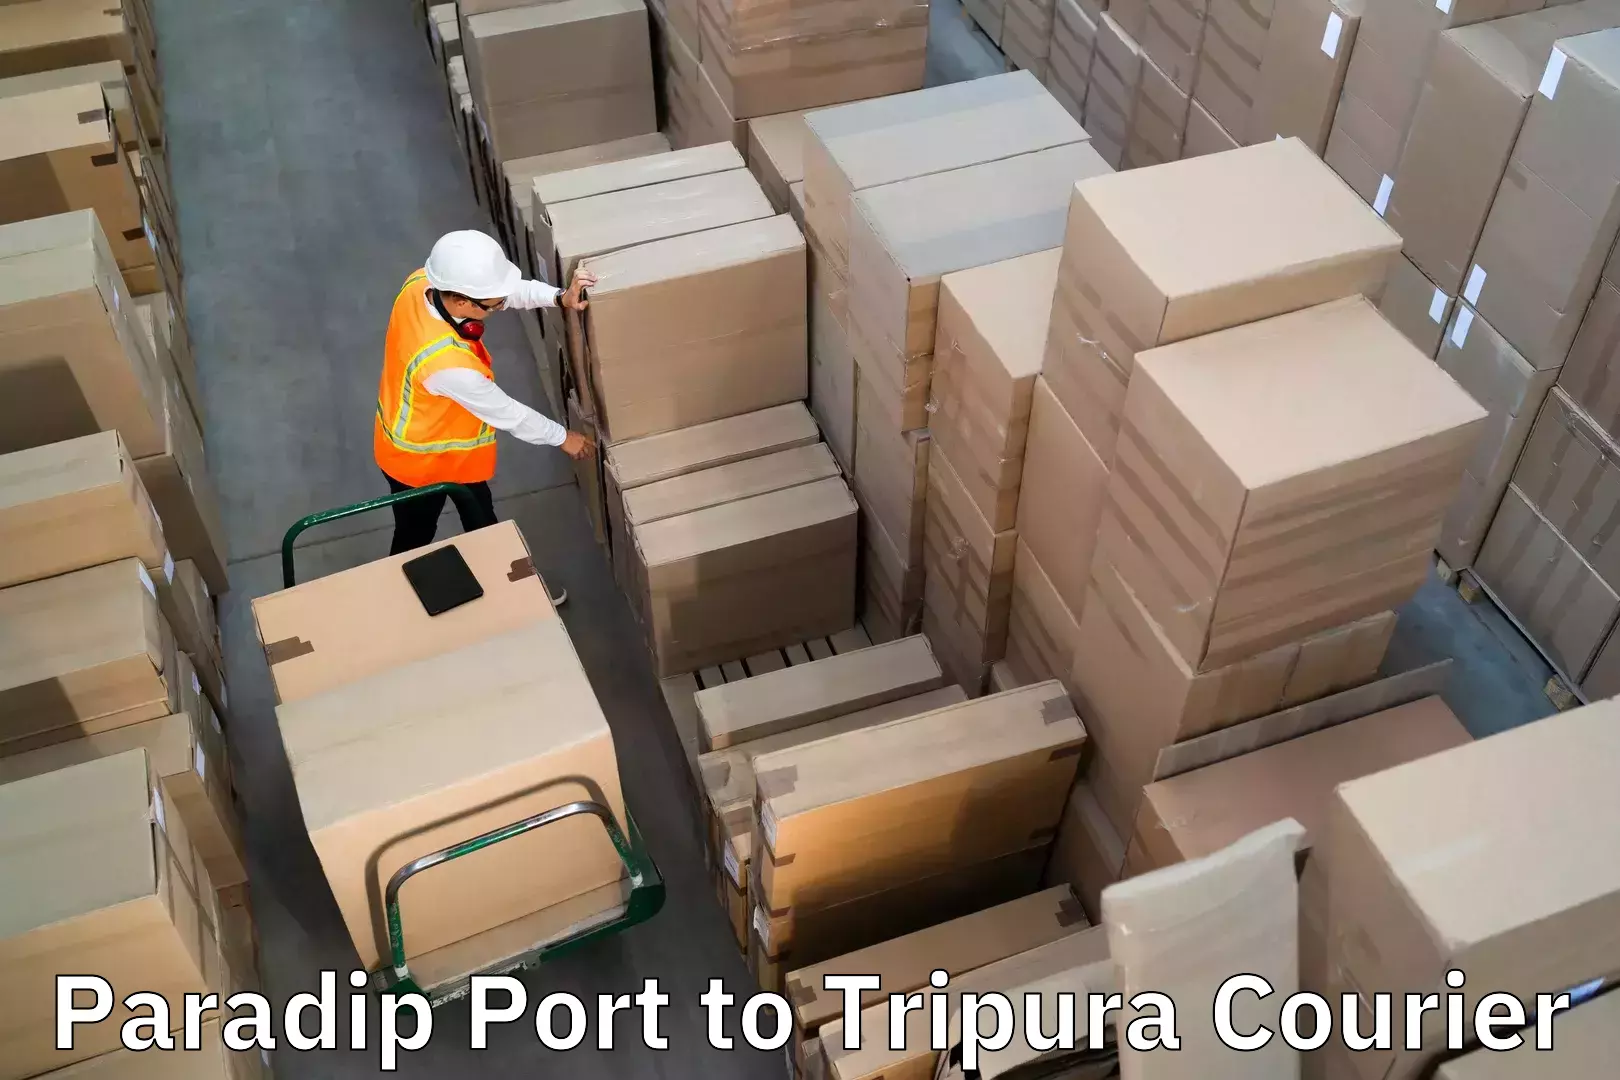 Fast track baggage delivery Paradip Port to Udaipur Tripura